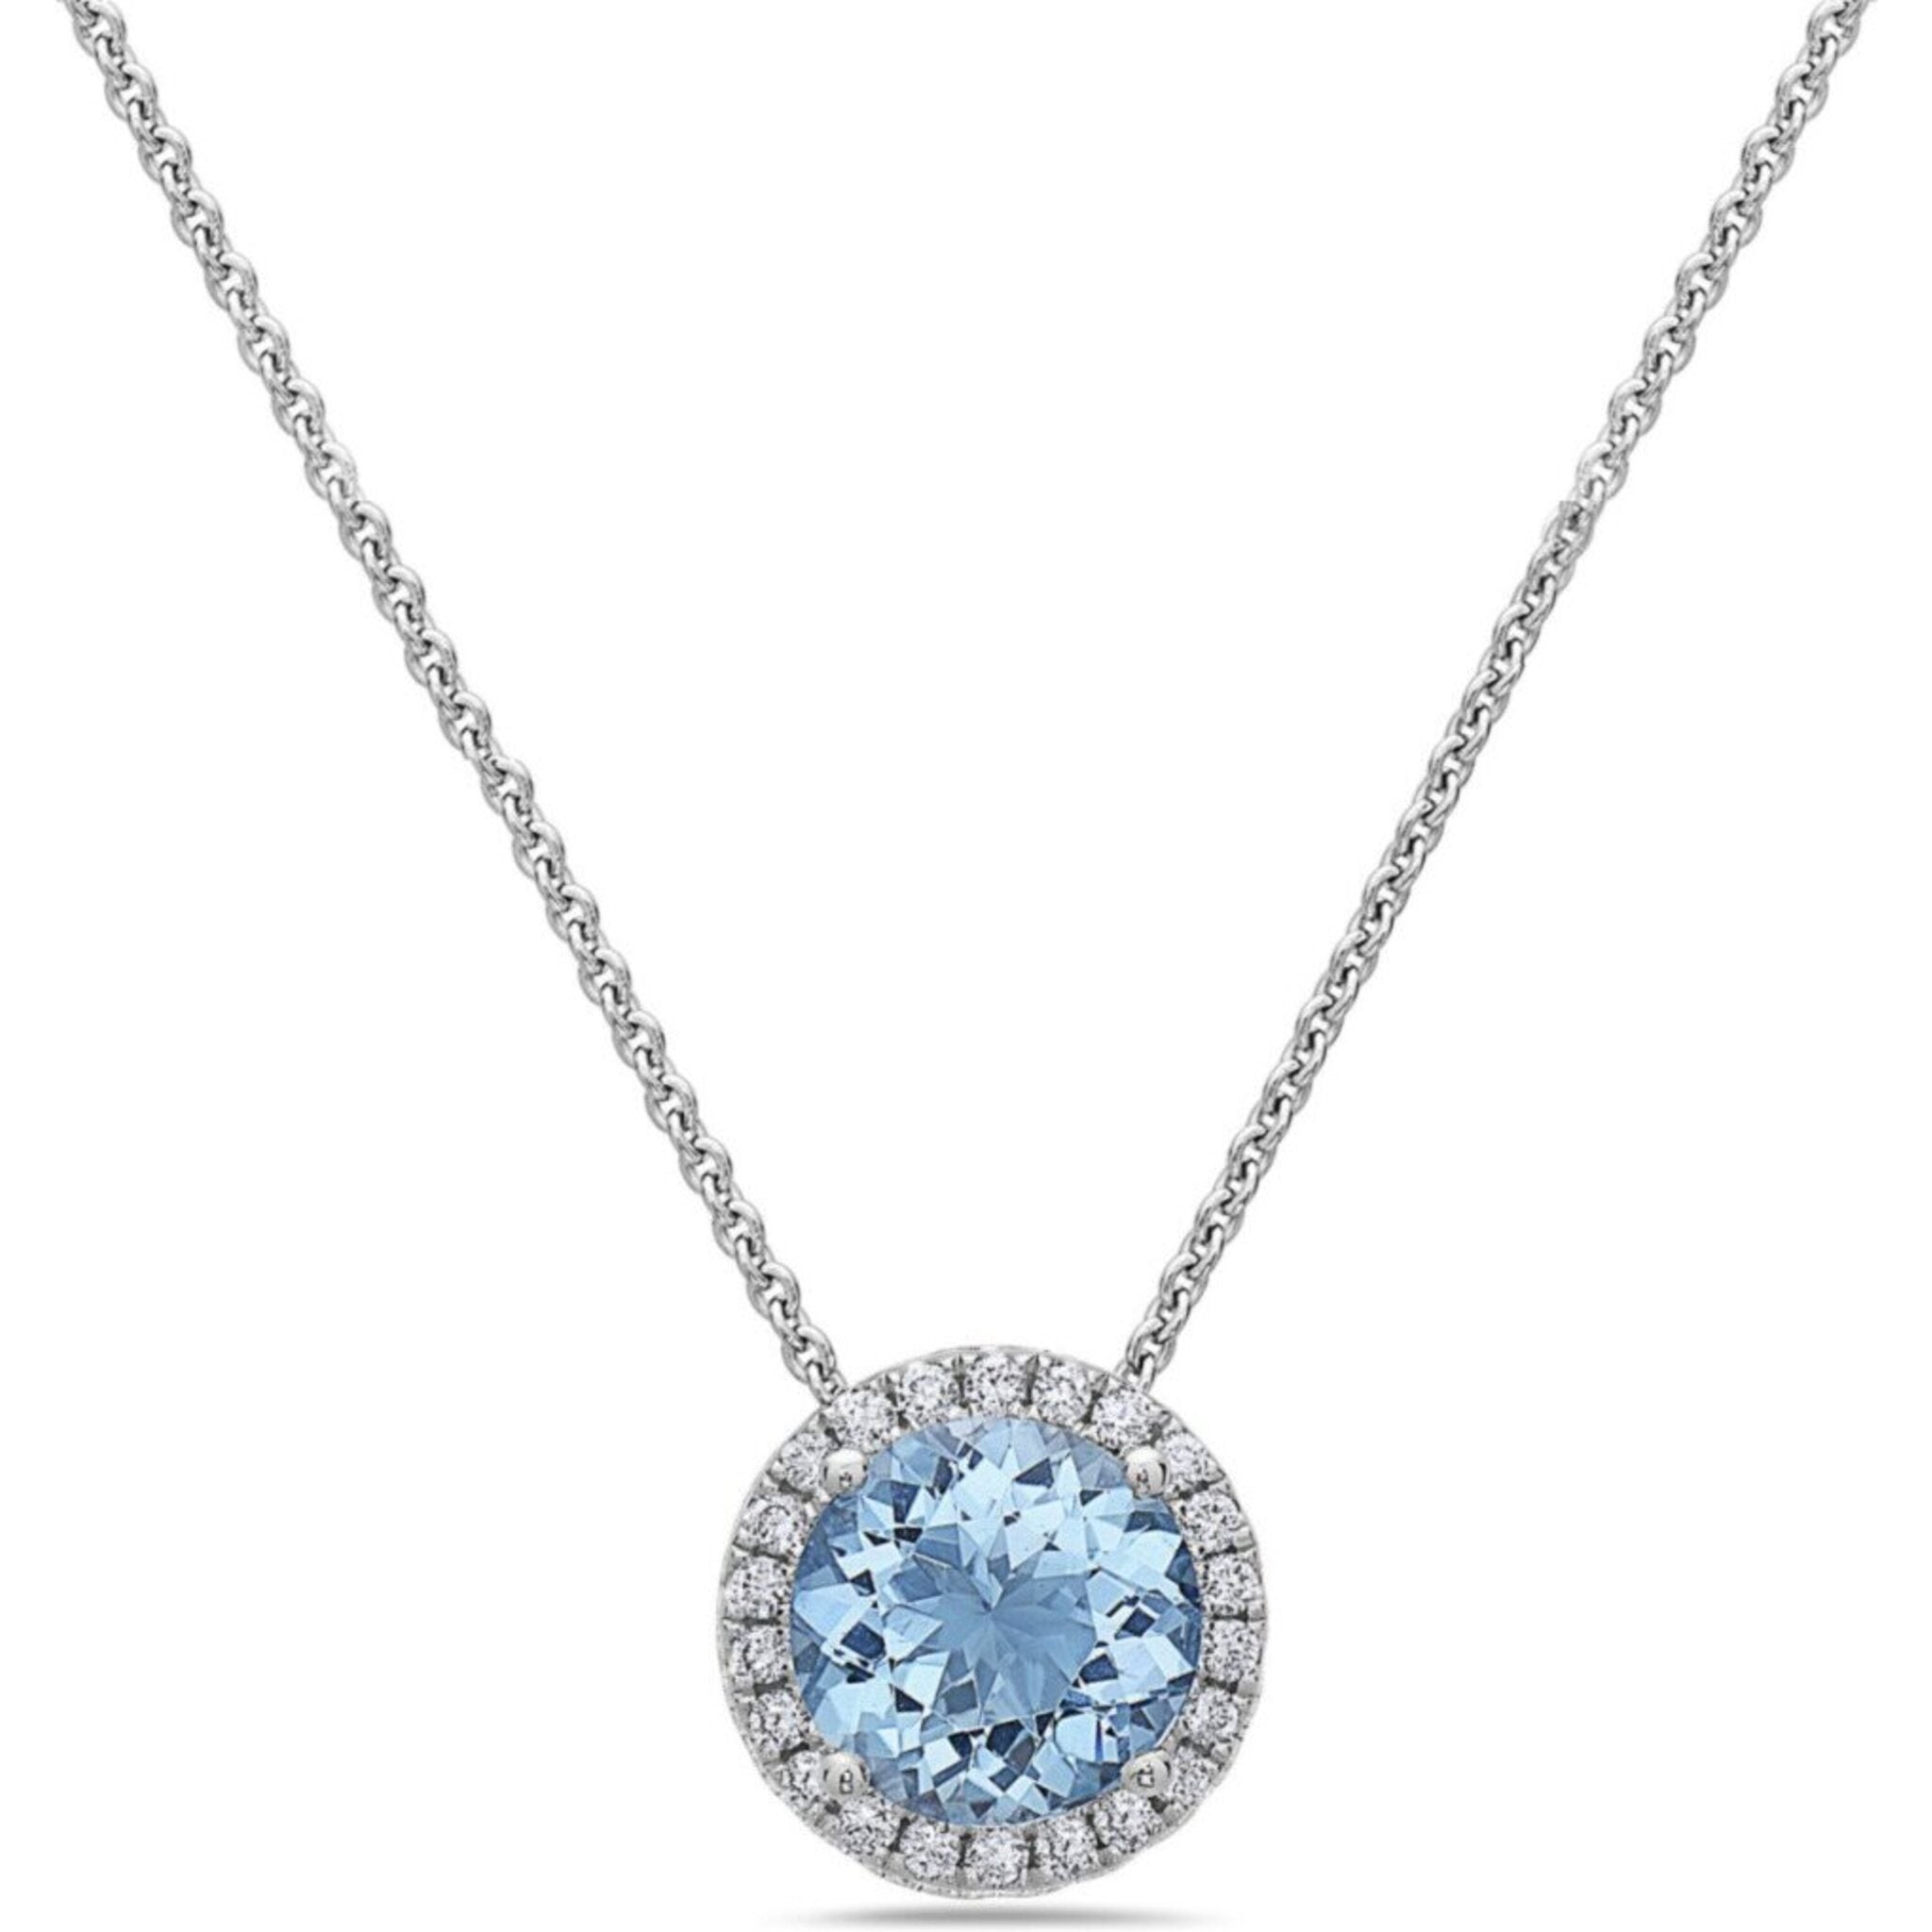 Aquamarine Gemstones by The Yard Station Necklace 14k W. Gold 1.25ct - IN239